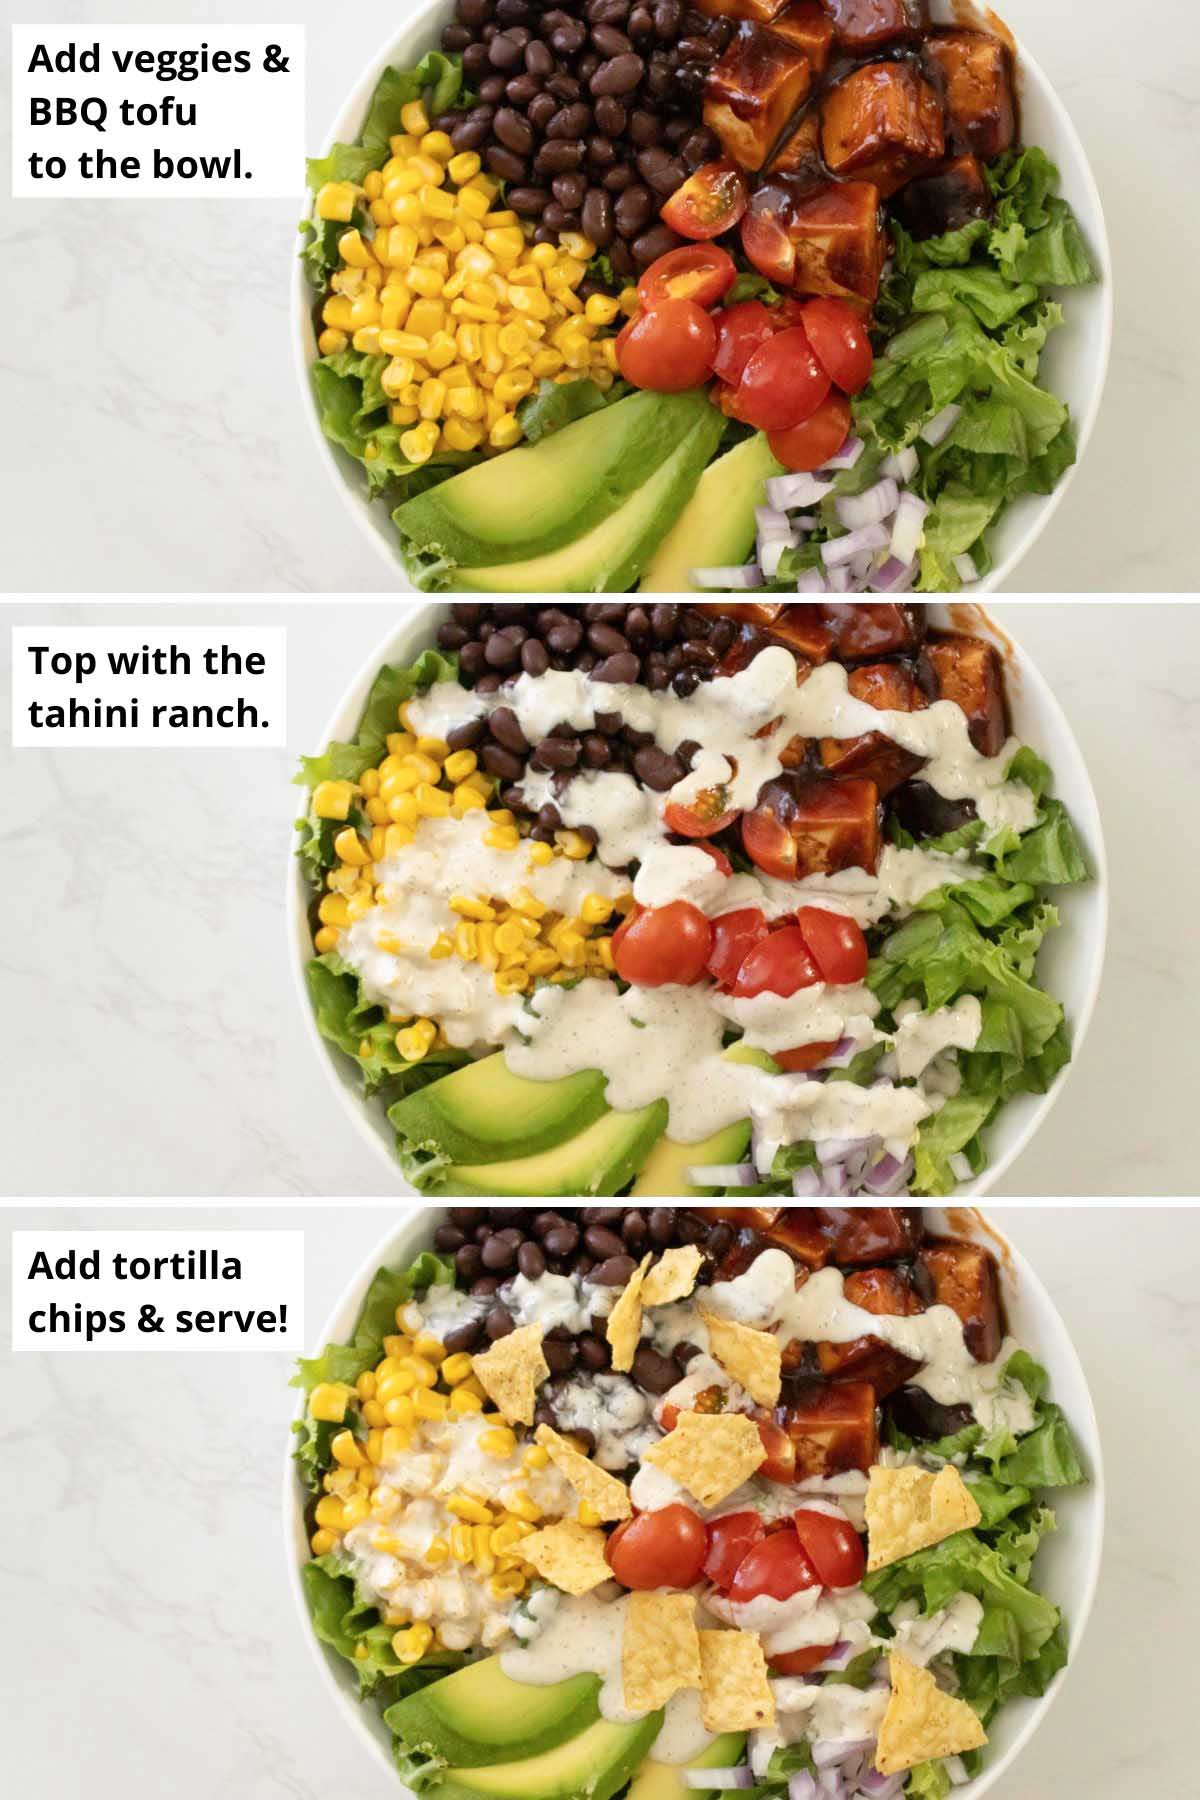 image collage showing the BBQ tofu salad before and after adding dressing and after adding tortilla chips